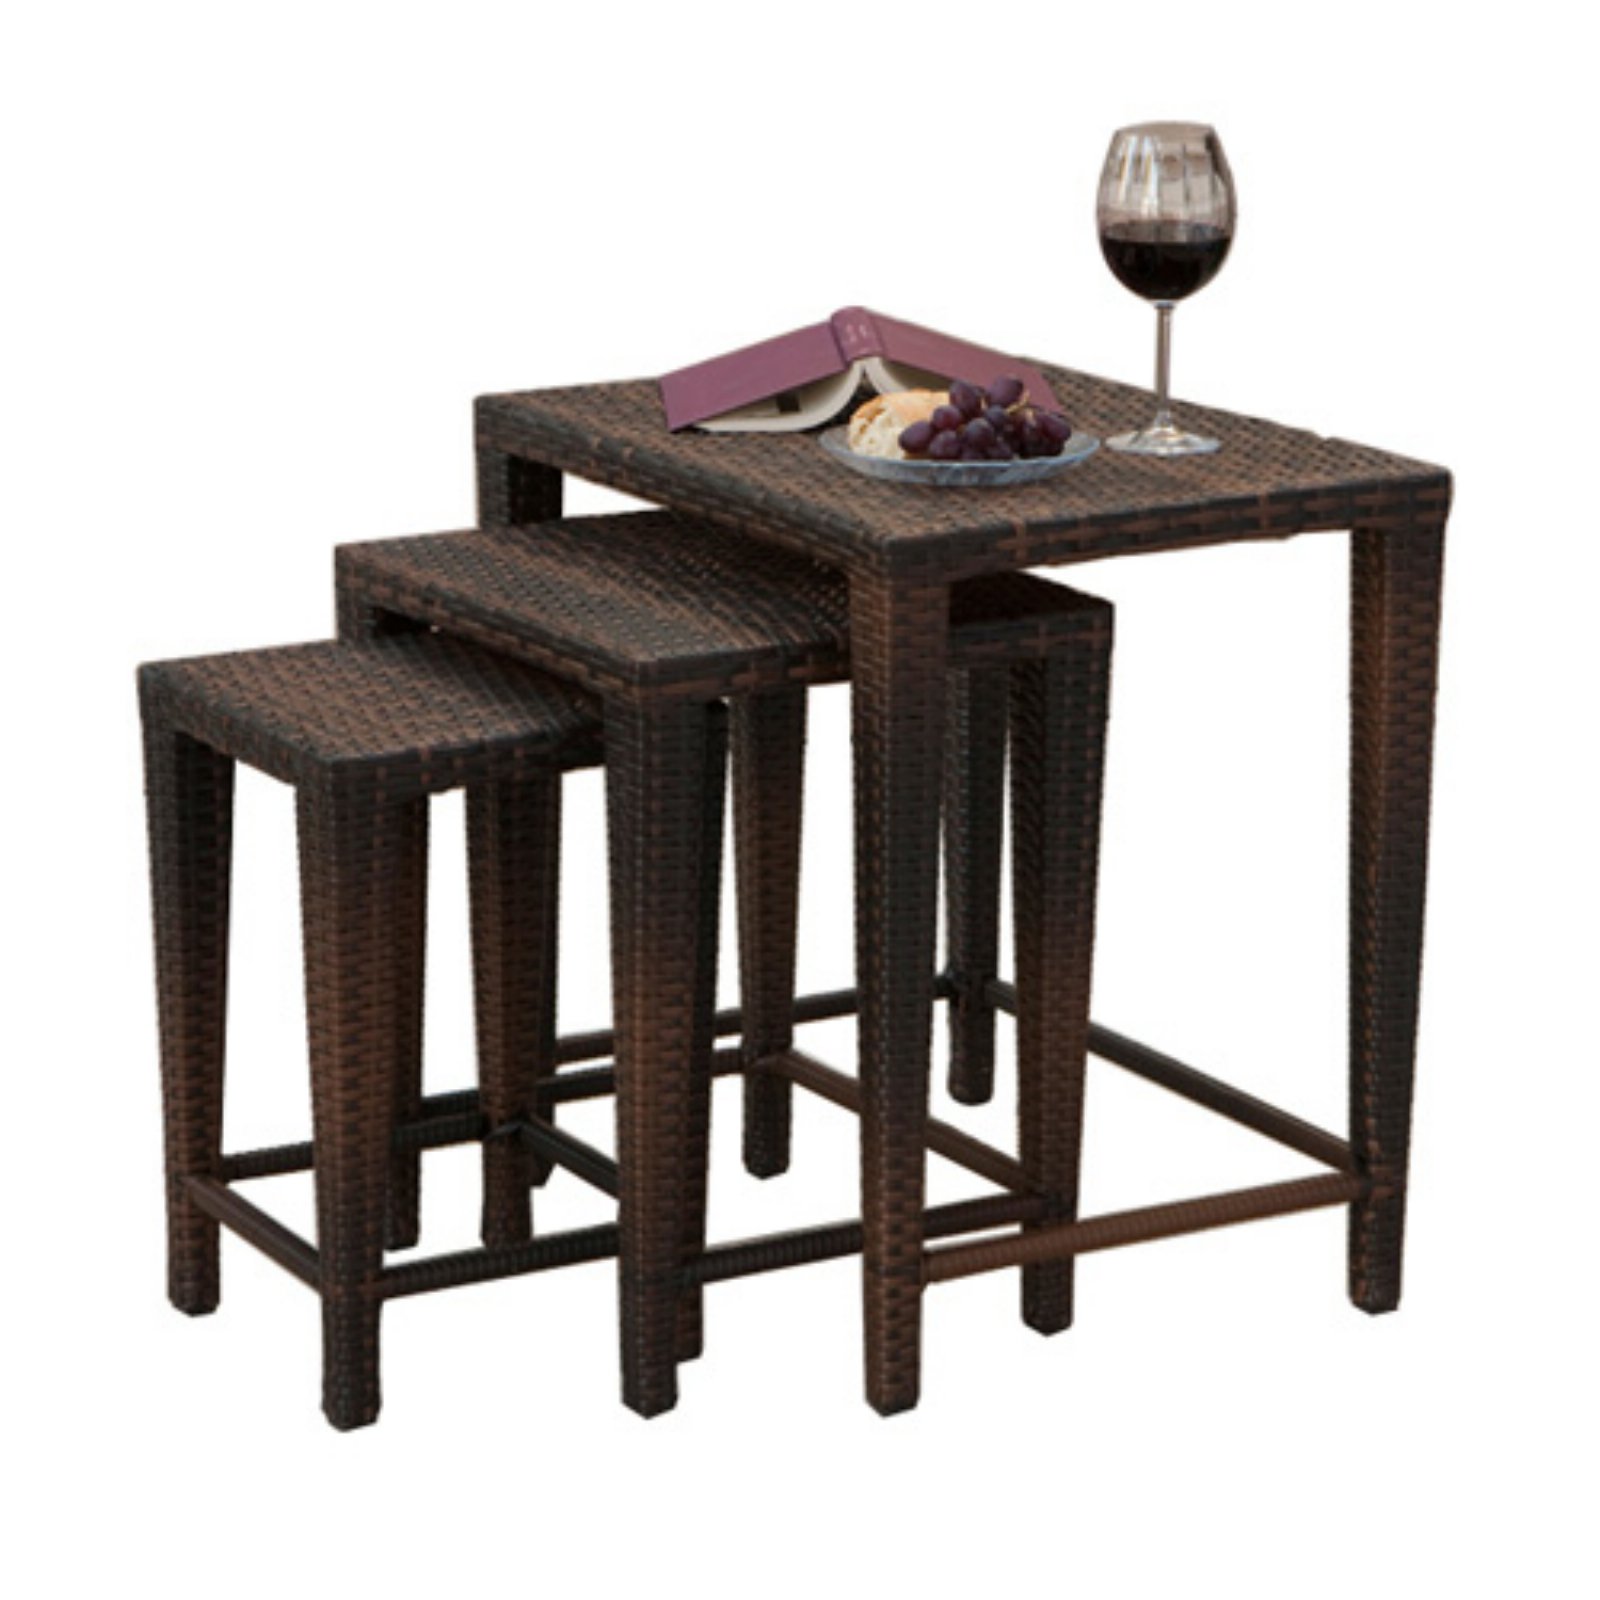 Wicker Multi-brown Nesting Tables - image 1 of 5